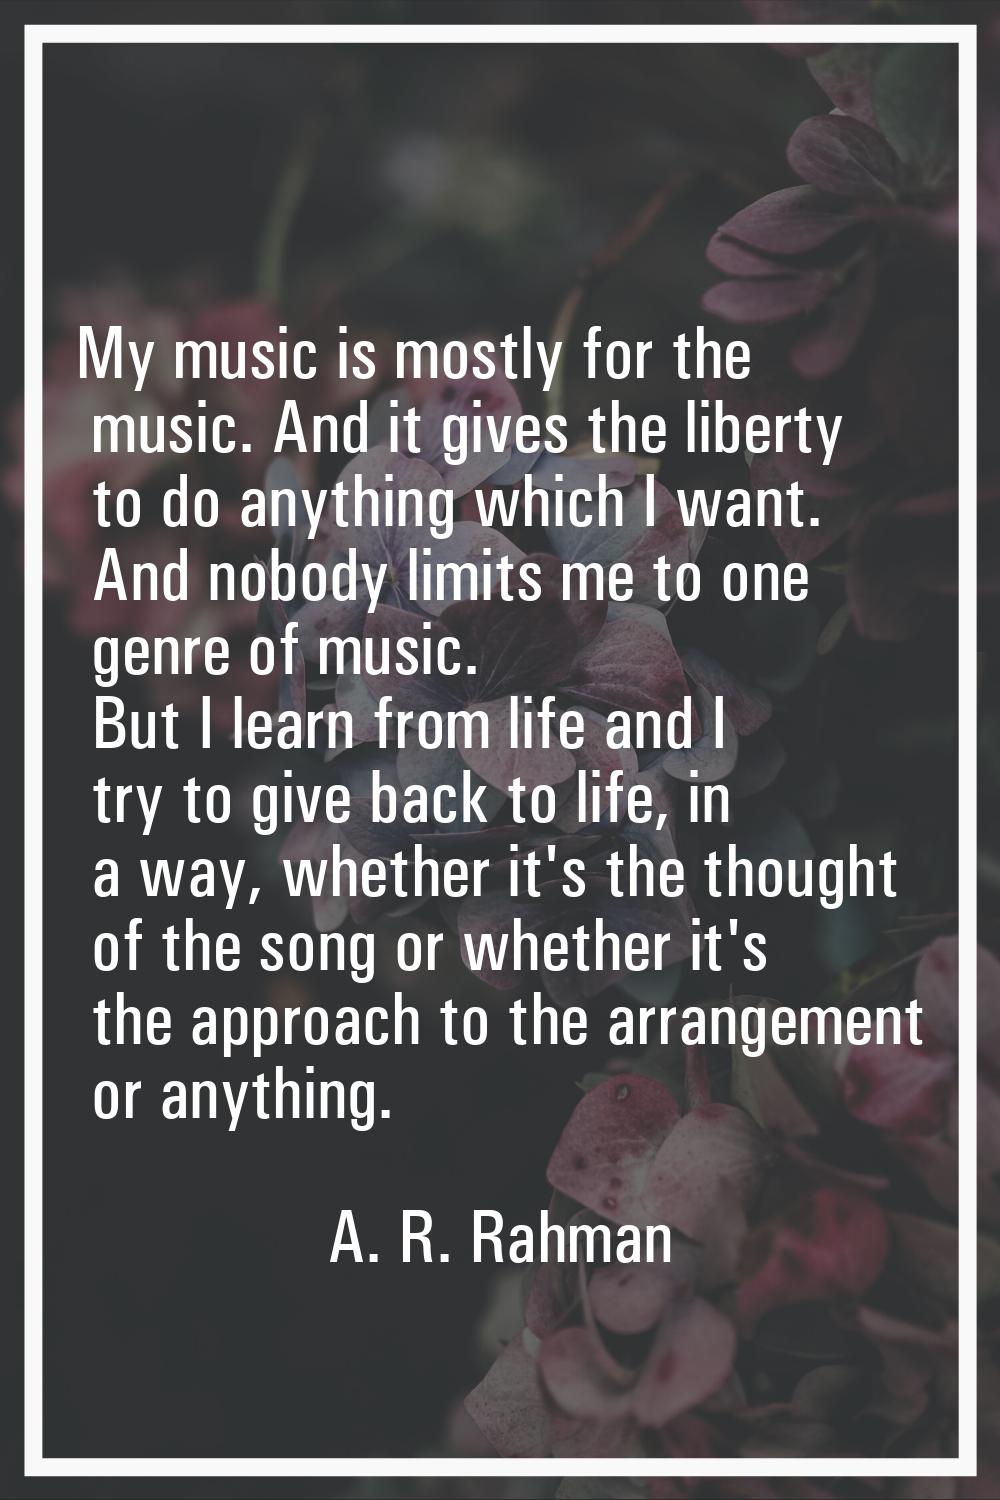 My music is mostly for the music. And it gives the liberty to do anything which I want. And nobody 